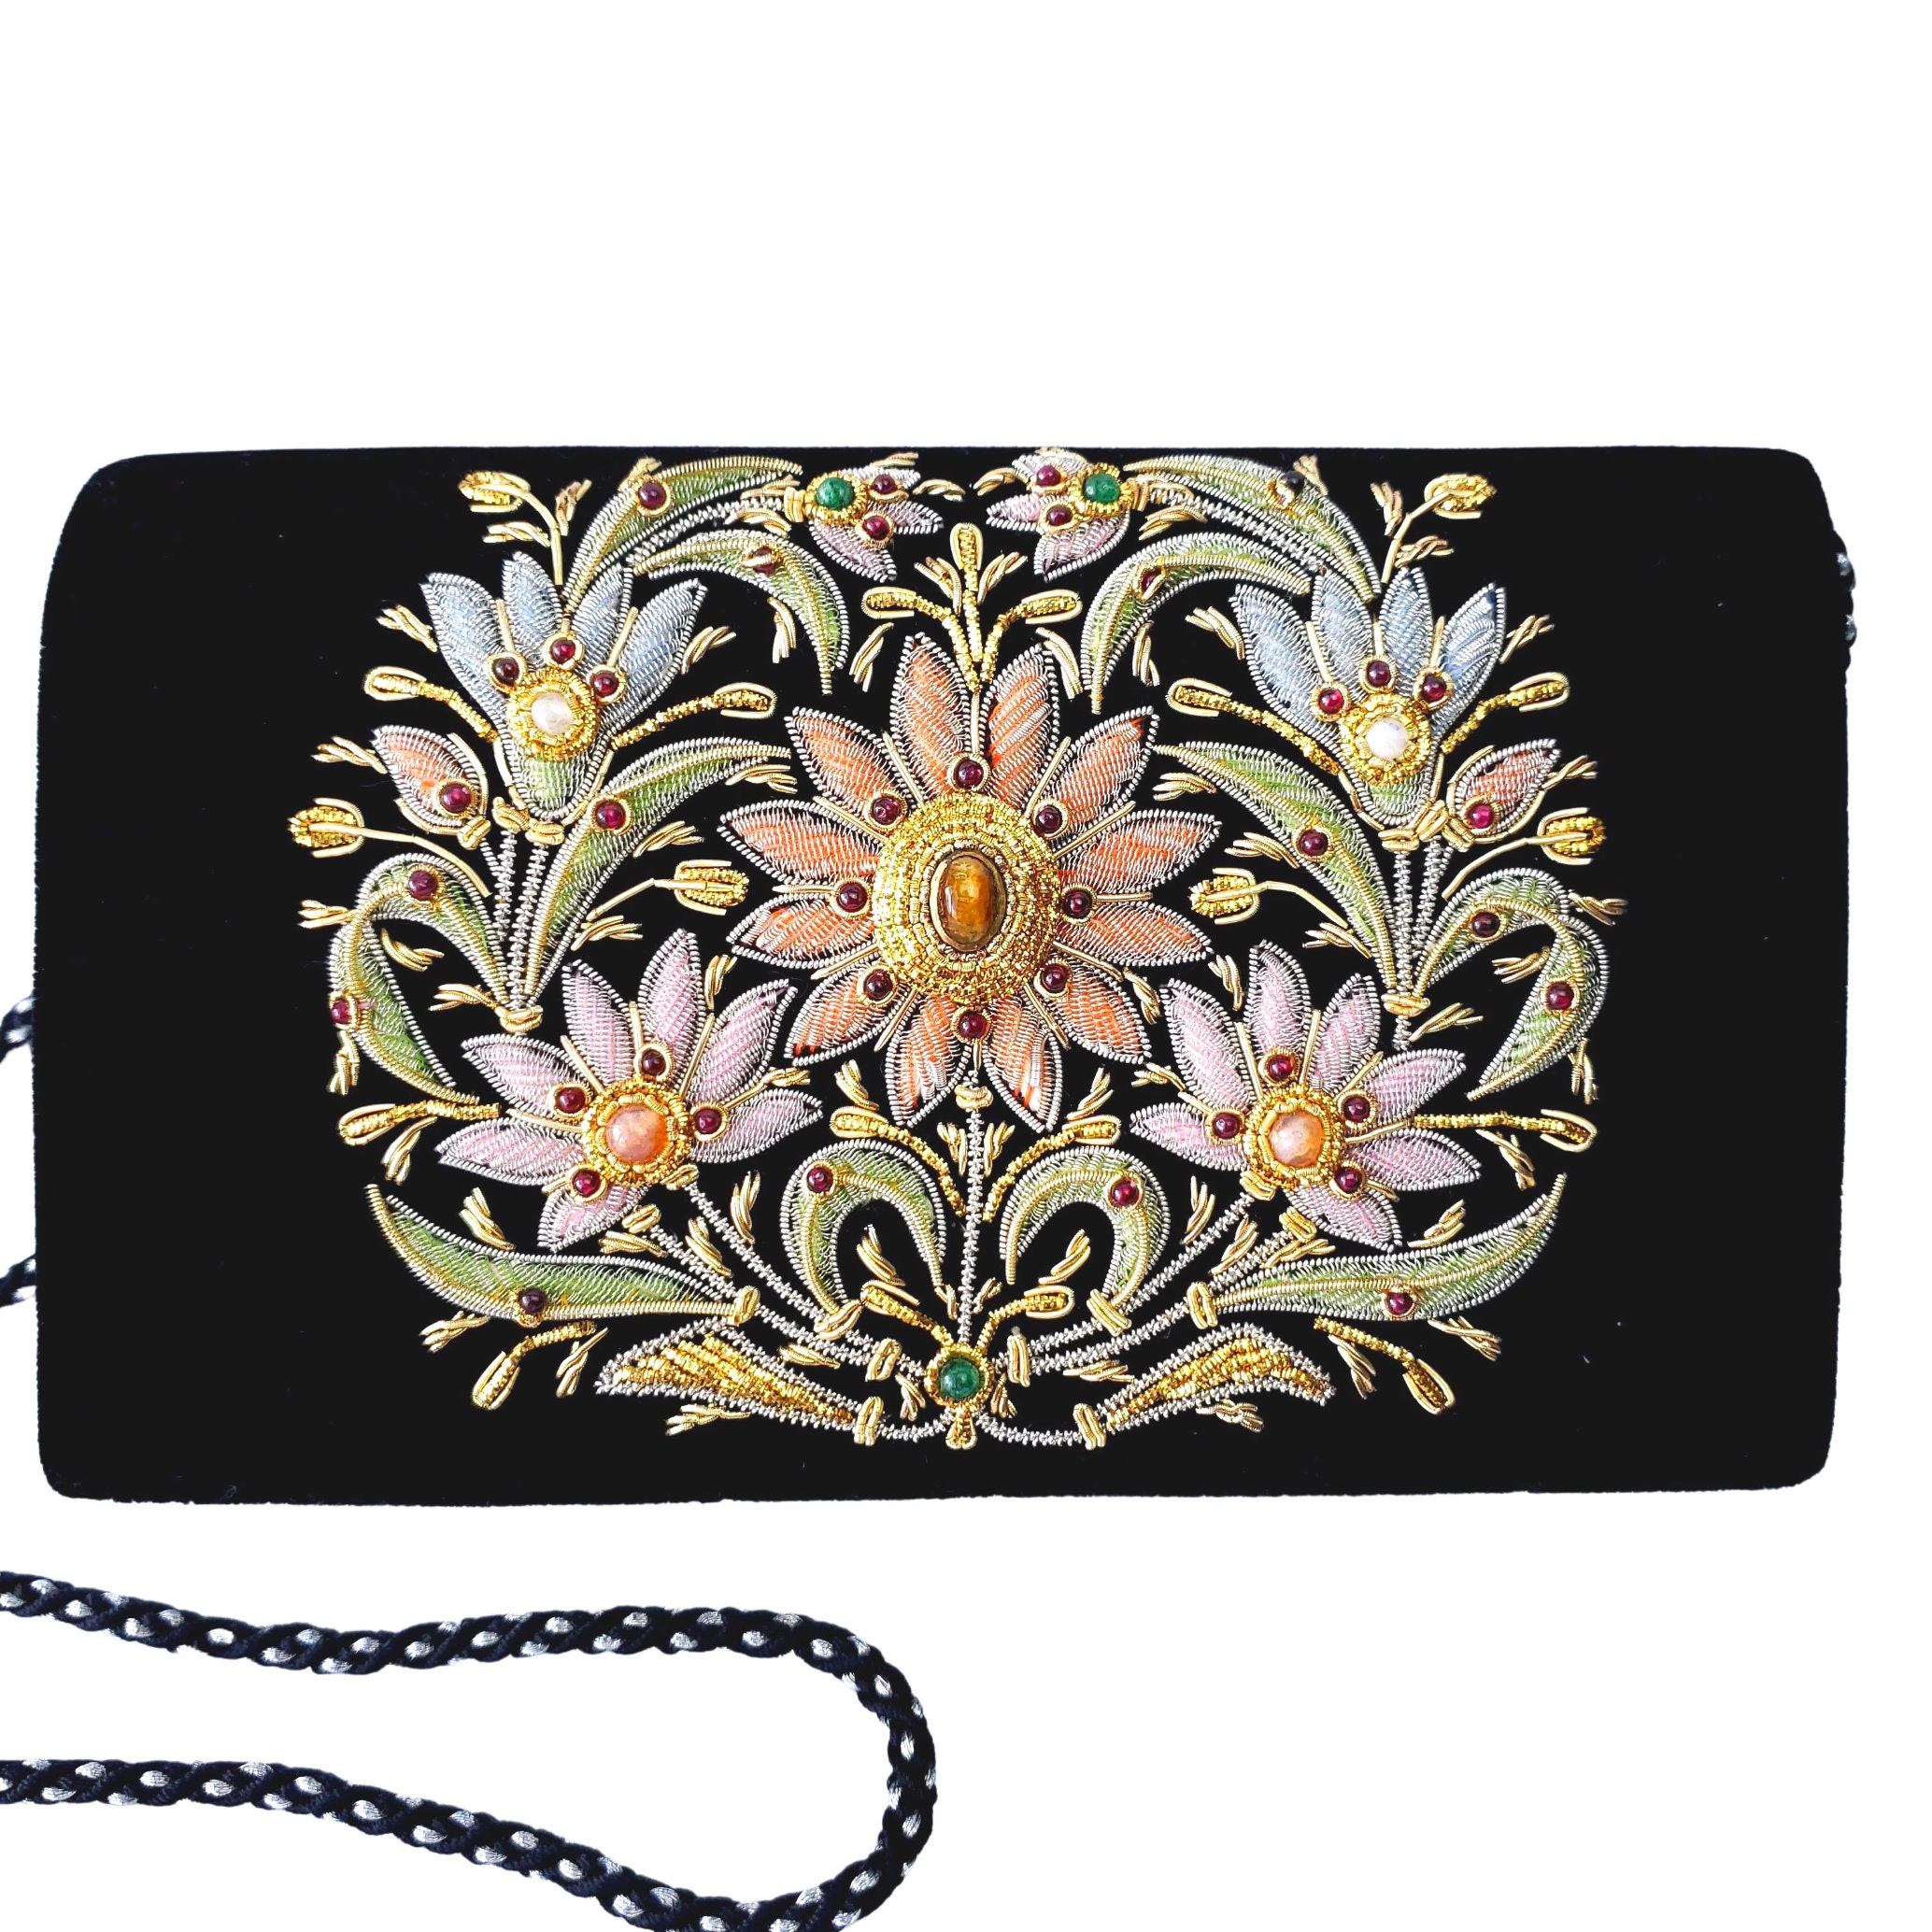 Embroidered Women Handbags Flower Embroidery Ethnic Shoulder Bags Hmong  Tote Purse : Clothing, Shoes & Jewelry - Amazon.com